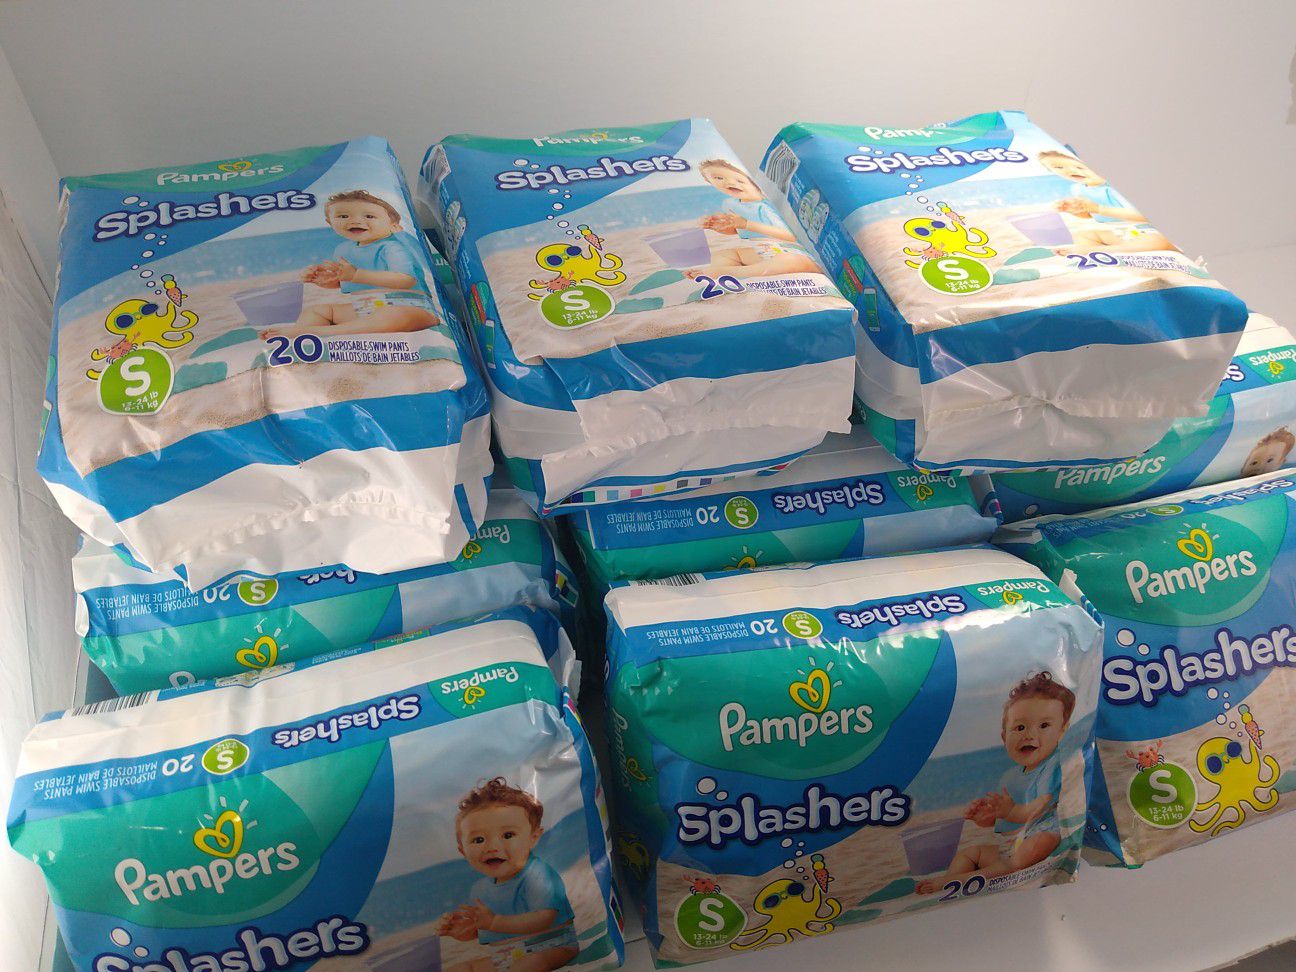 15x Pampers Splashers S13-24 lb (6-11 kg) Disposable Swim Pants Size Small 20 Count